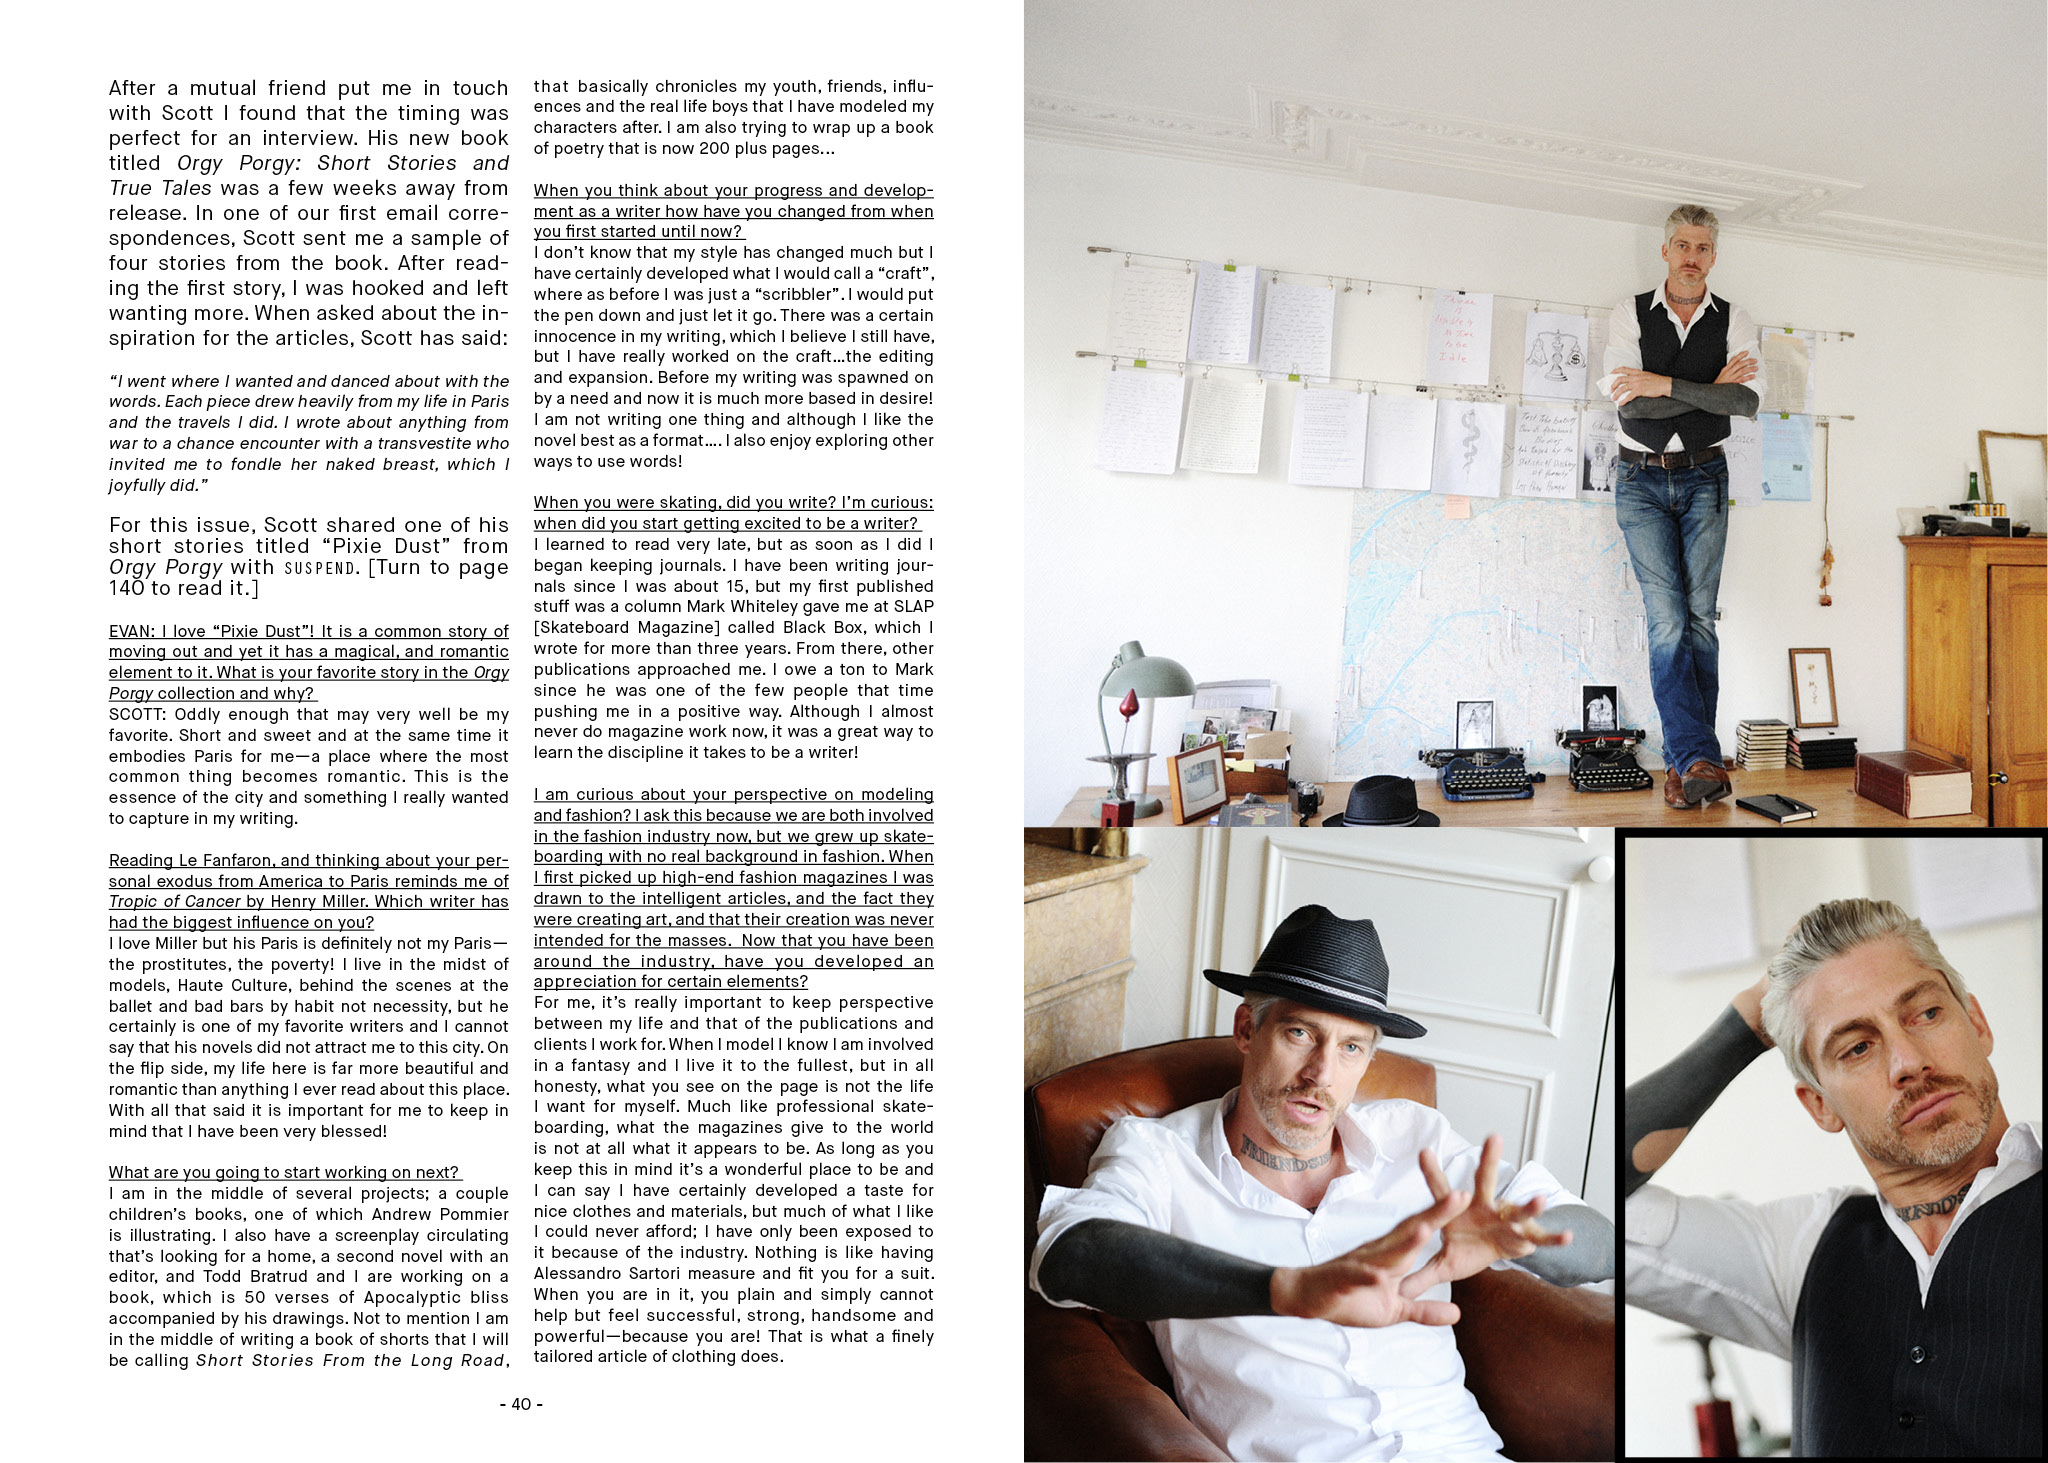  "Scott Bourne: Path of Exile" interviewed by Evan Goodfellow and photographed by Elise Toide in ISSUE 06 of SUSPEND Magazine. 